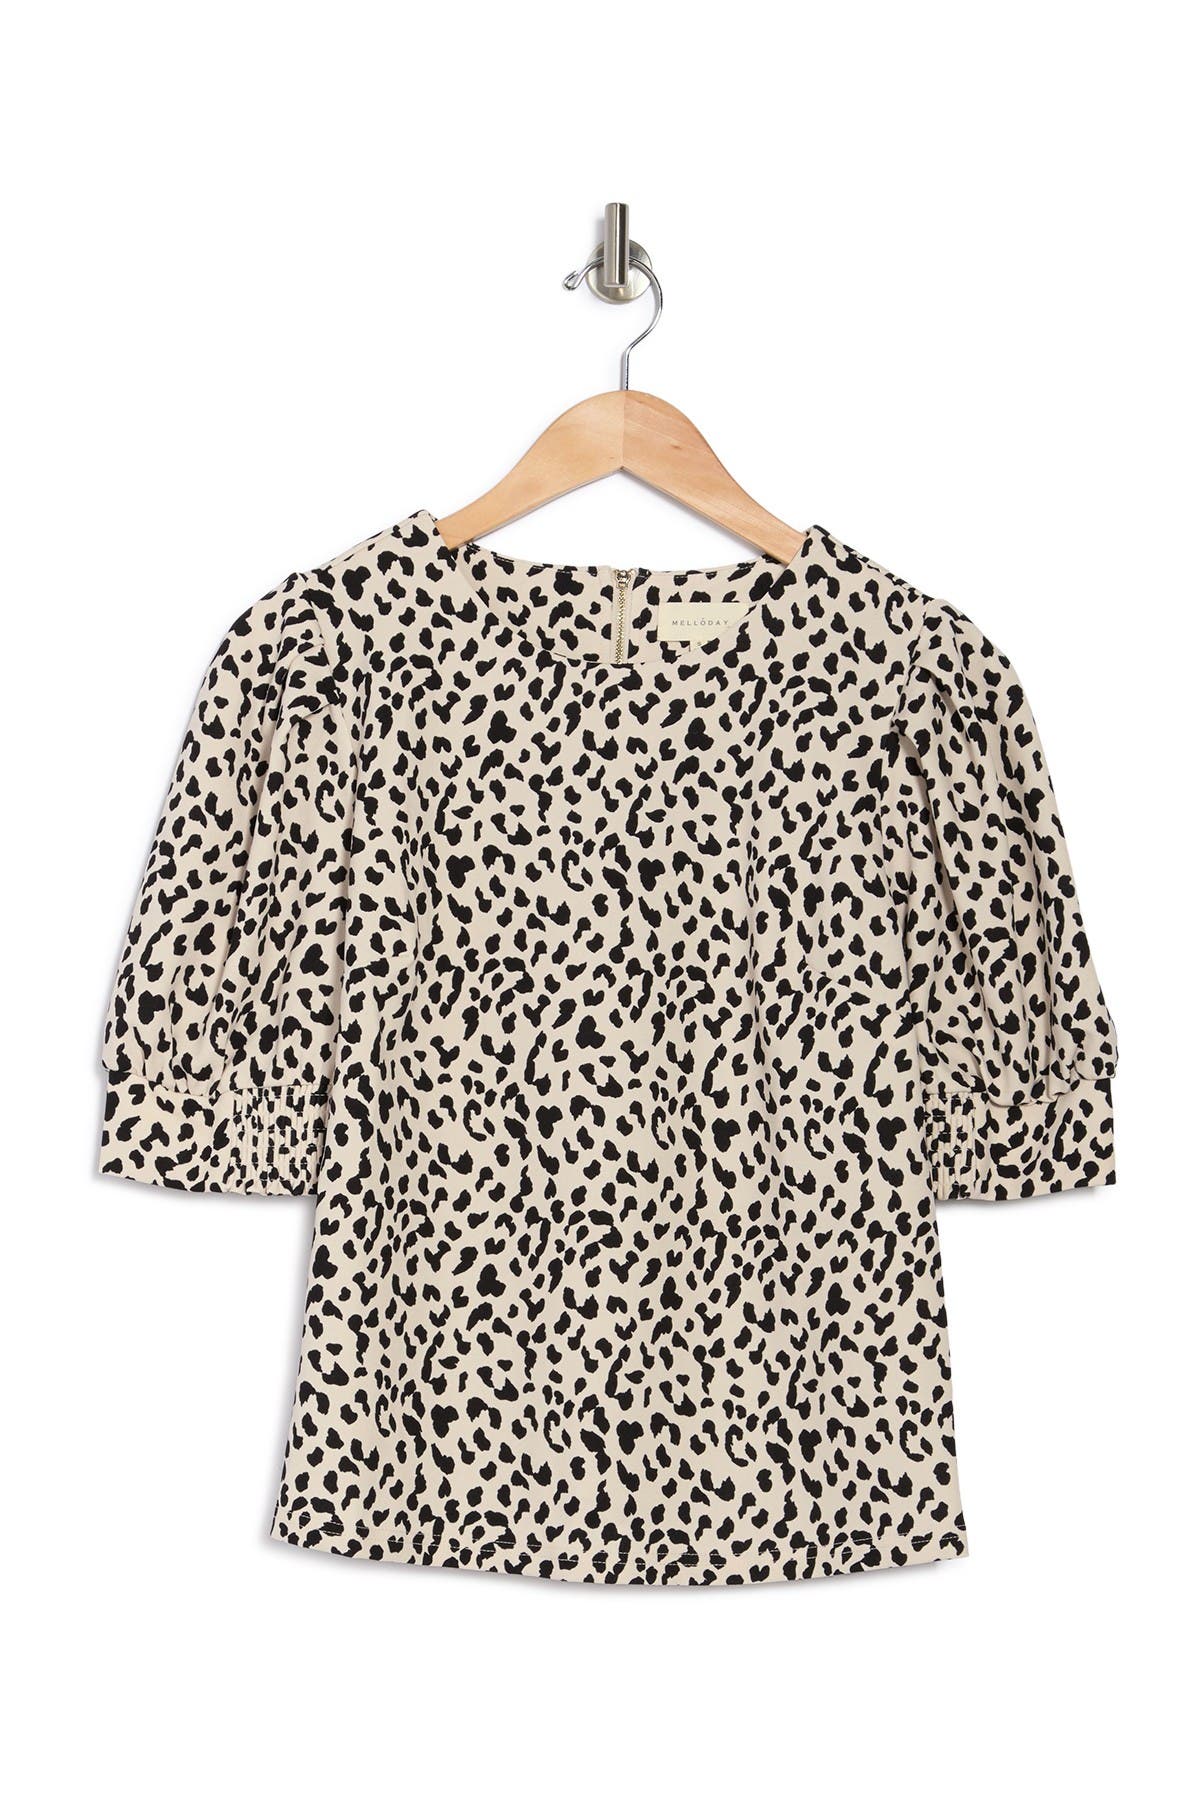 Melloday Zip Back Puff Sleeve Knit Blouse In Ivory Black Animal